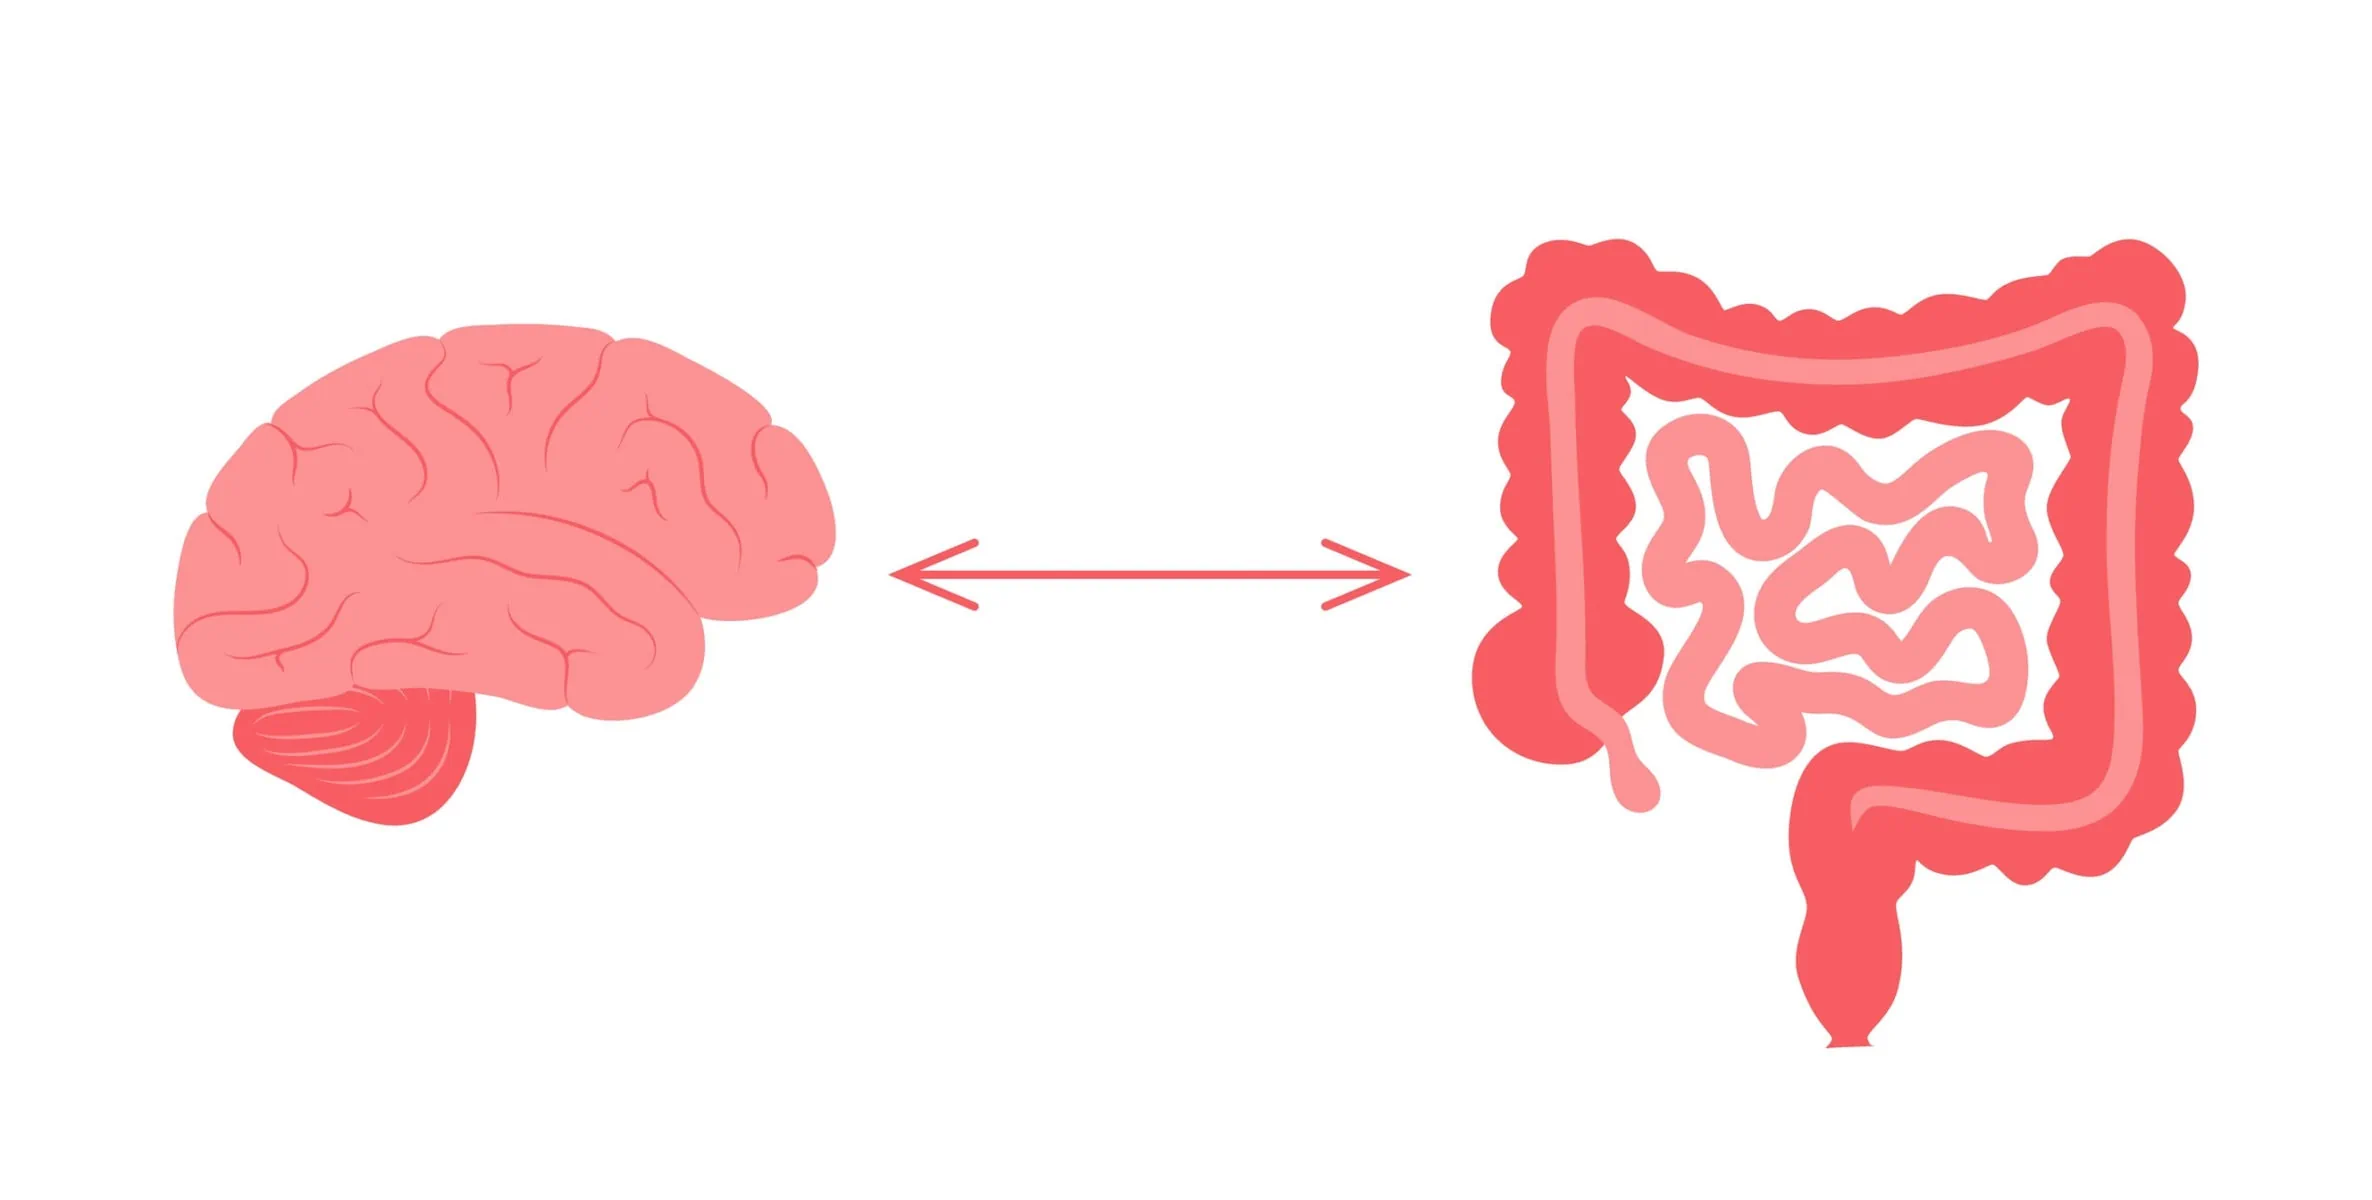 Microbiome – The missing link in the gut-brain axis